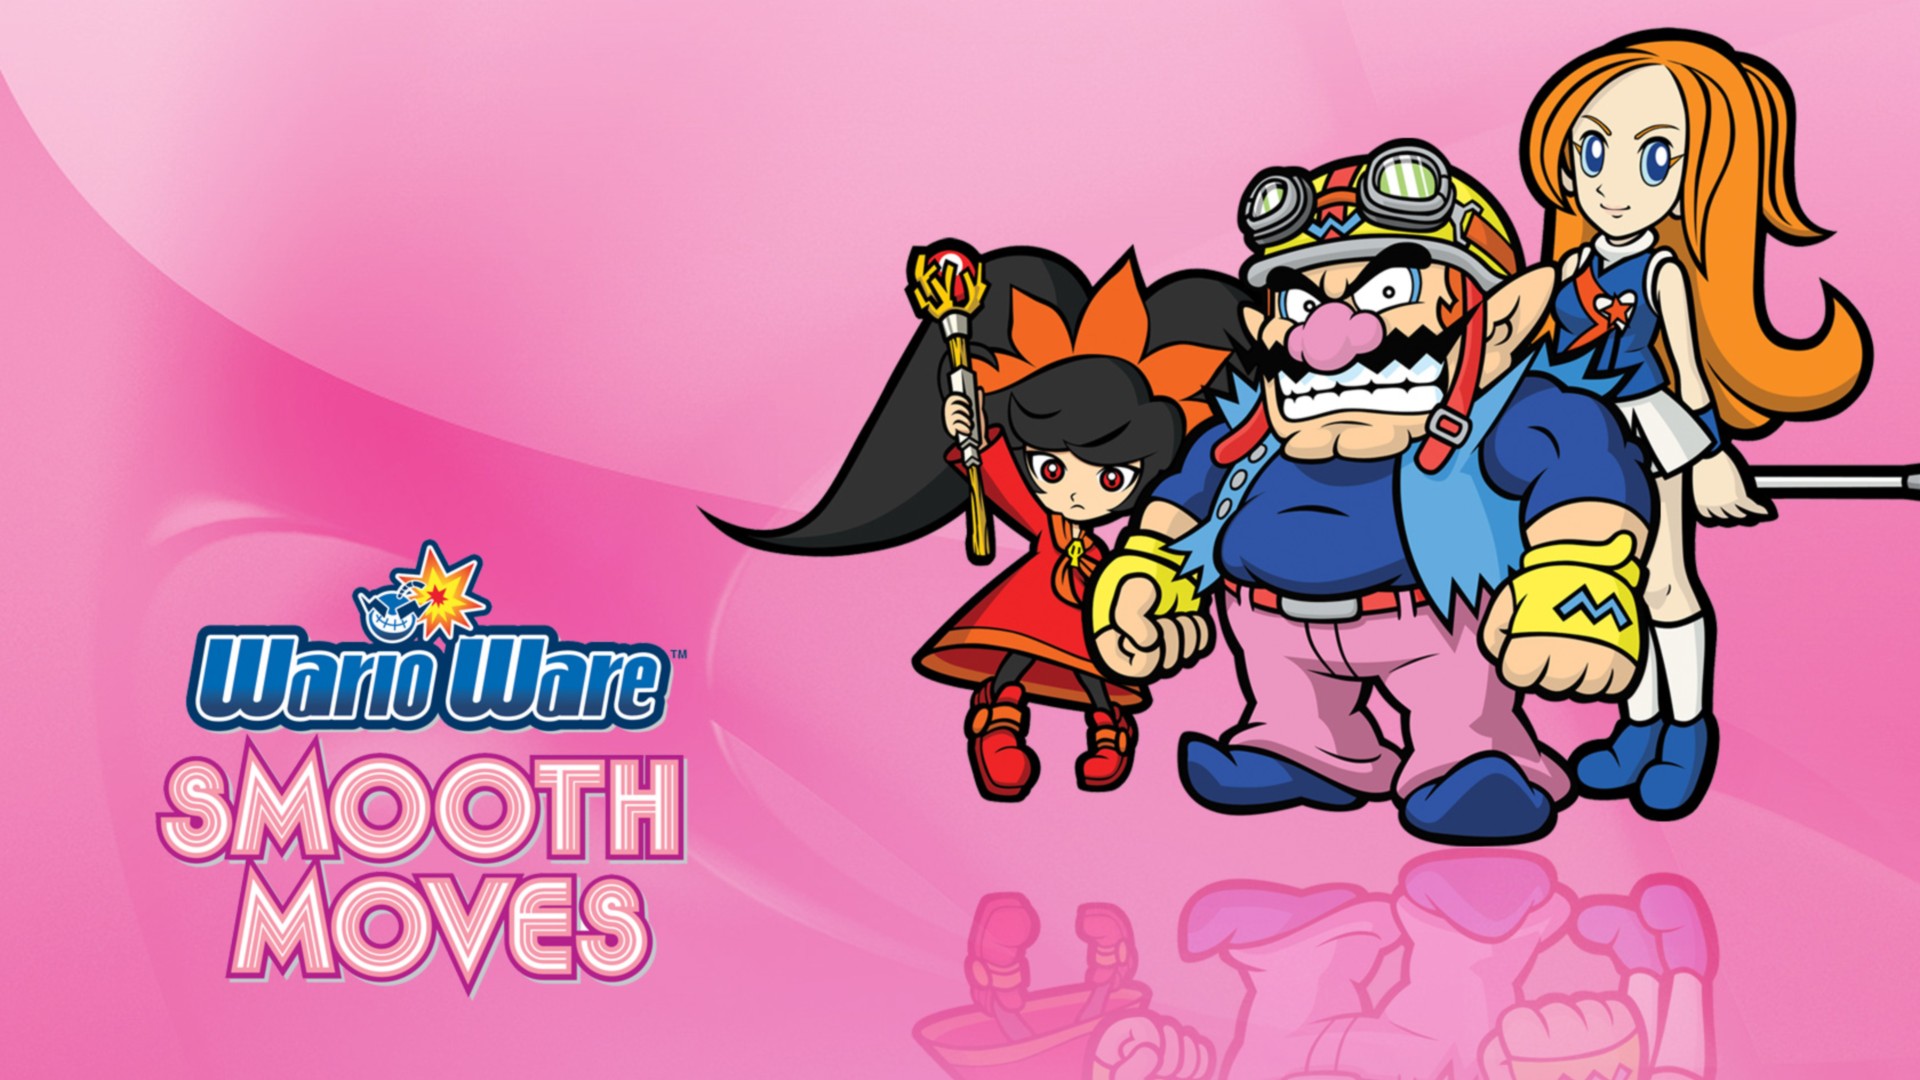 WarioWare: Smooth Moves Backgrounds, Compatible - PC, Mobile, Gadgets| 1920x1080 px